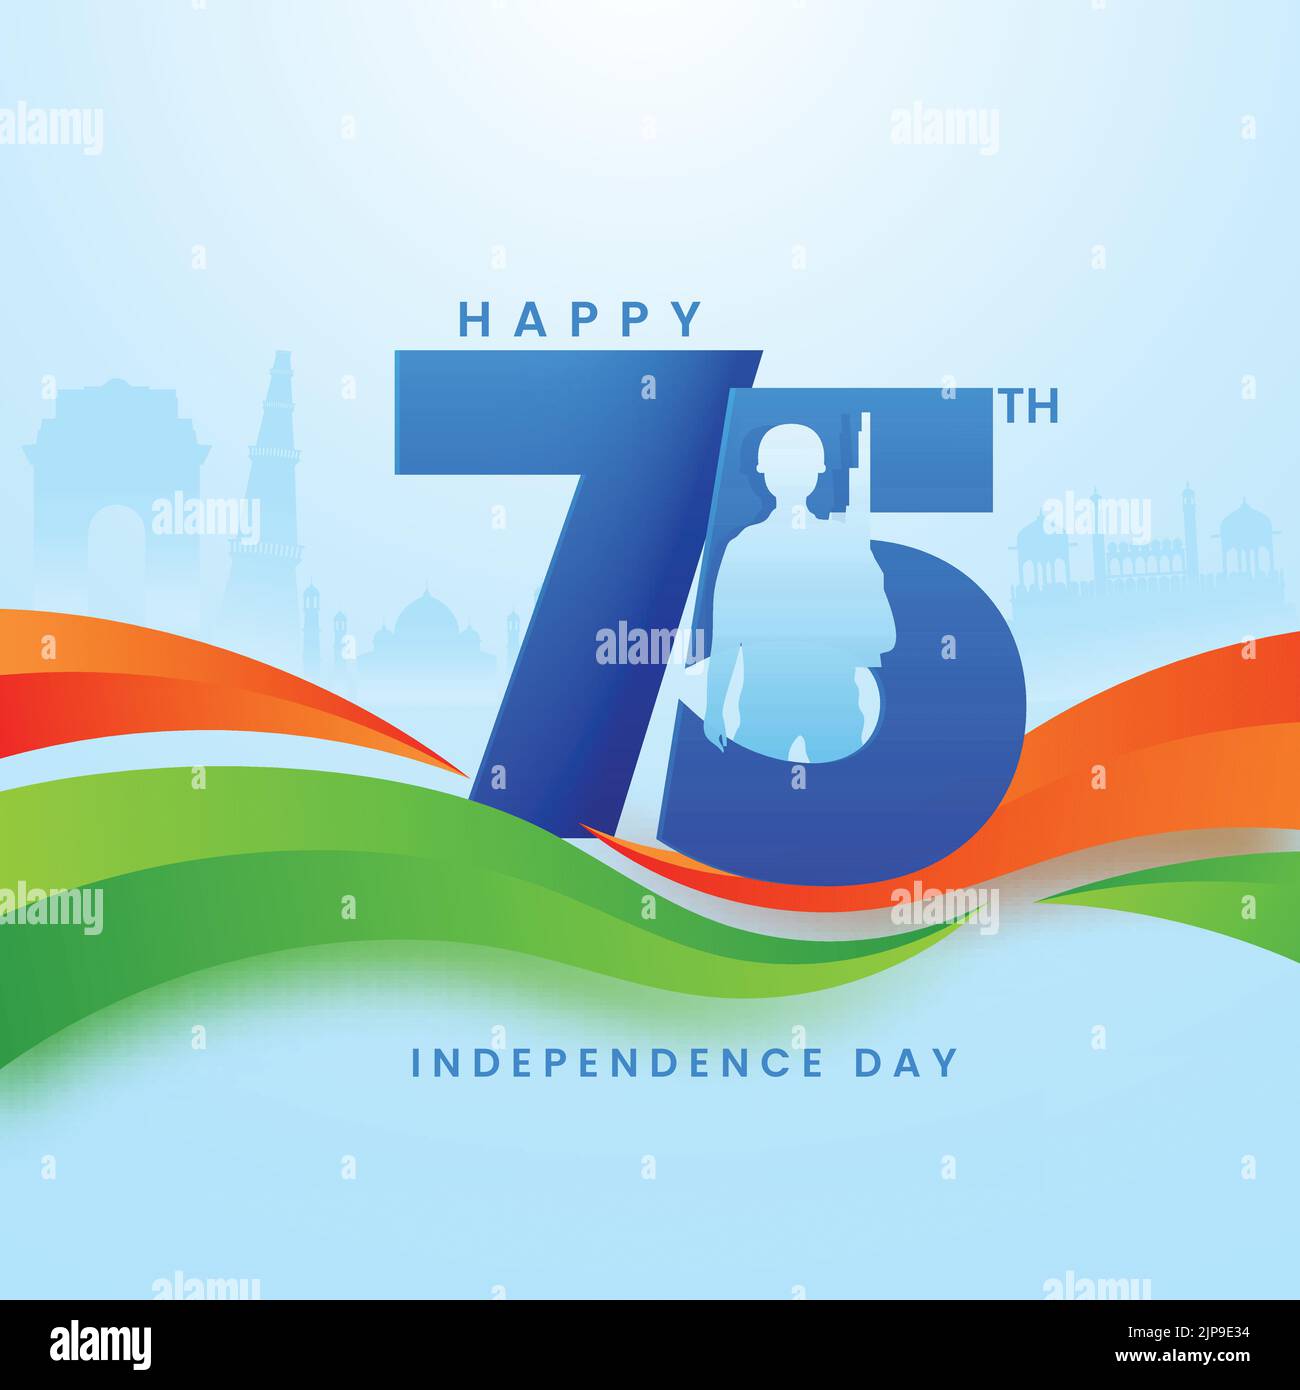 75 Years of Indian Independence Day Celebration Concept with Soldier Illustration and Saffron and Green Waves on Famous Monuments Background. Stock Vector